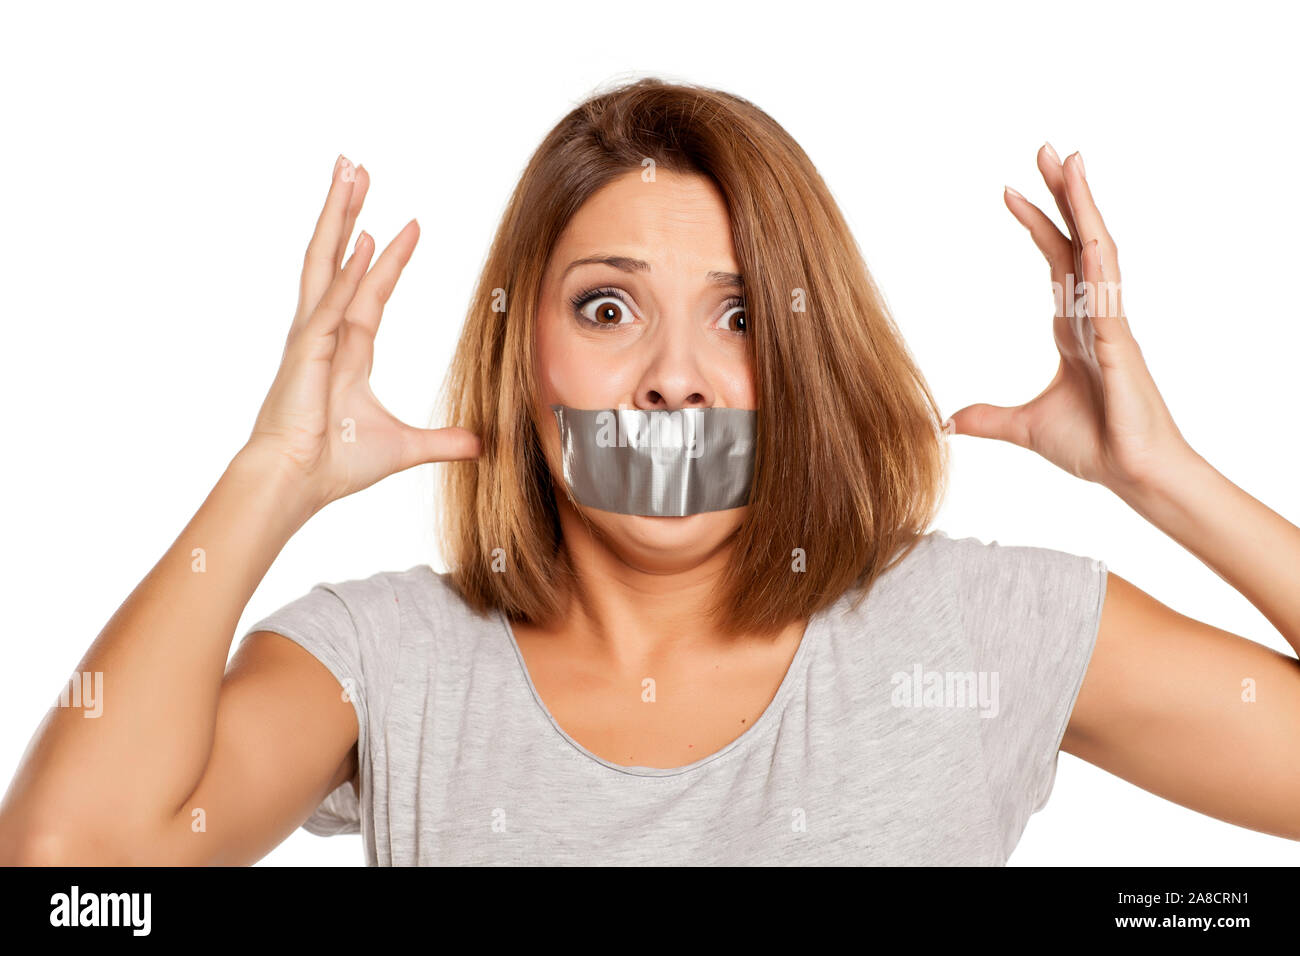 nervous young woman with adhesive tape over her mouth Stock Photo